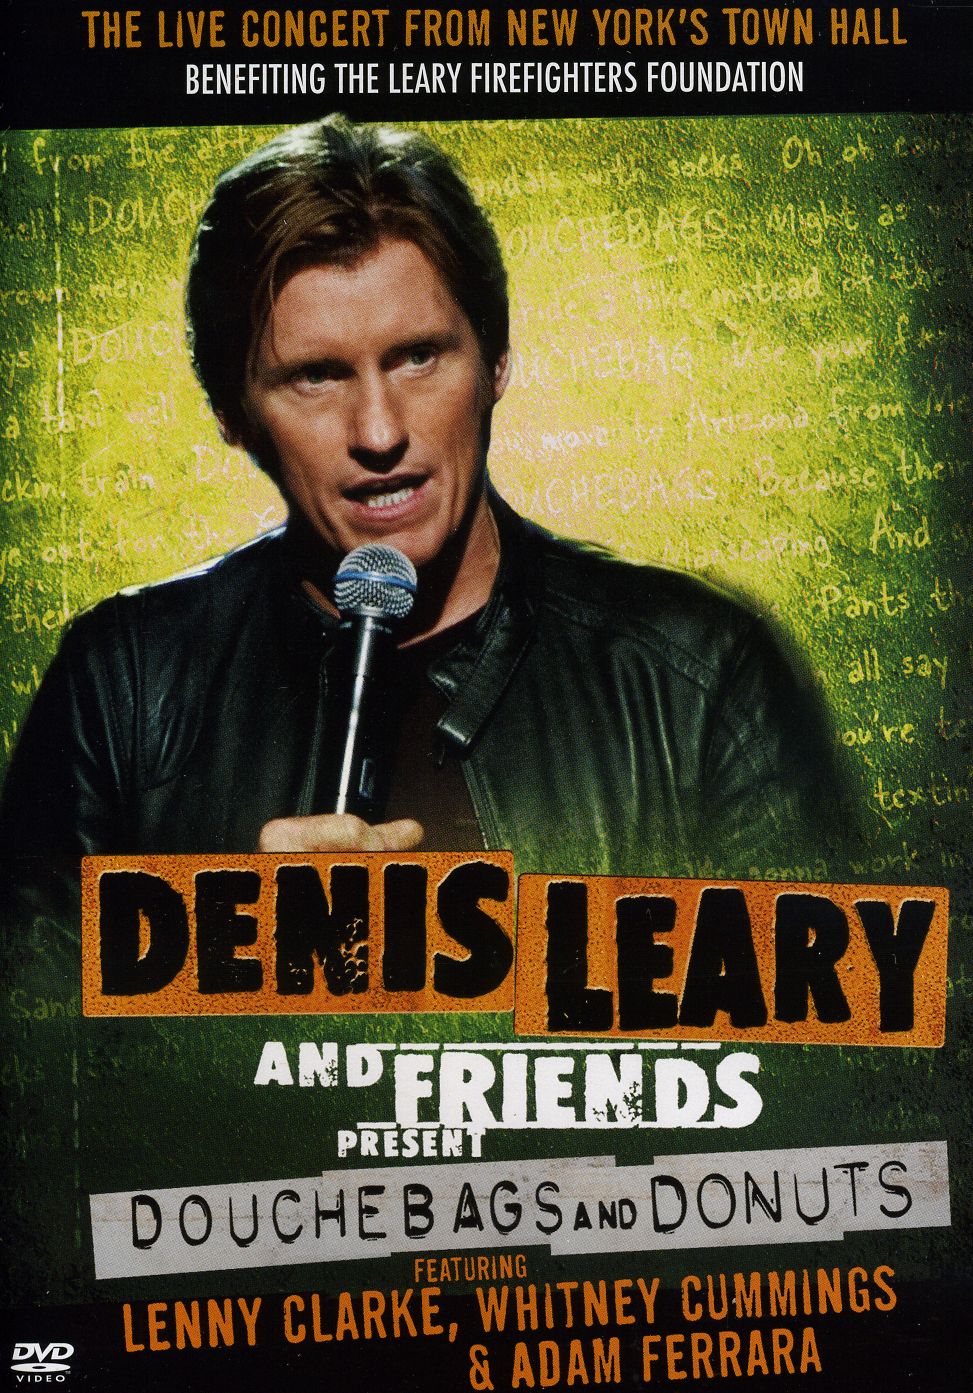 DENIS LEARY & FRIENDS PRESENTS: DOUCHBAGS & DONUTS